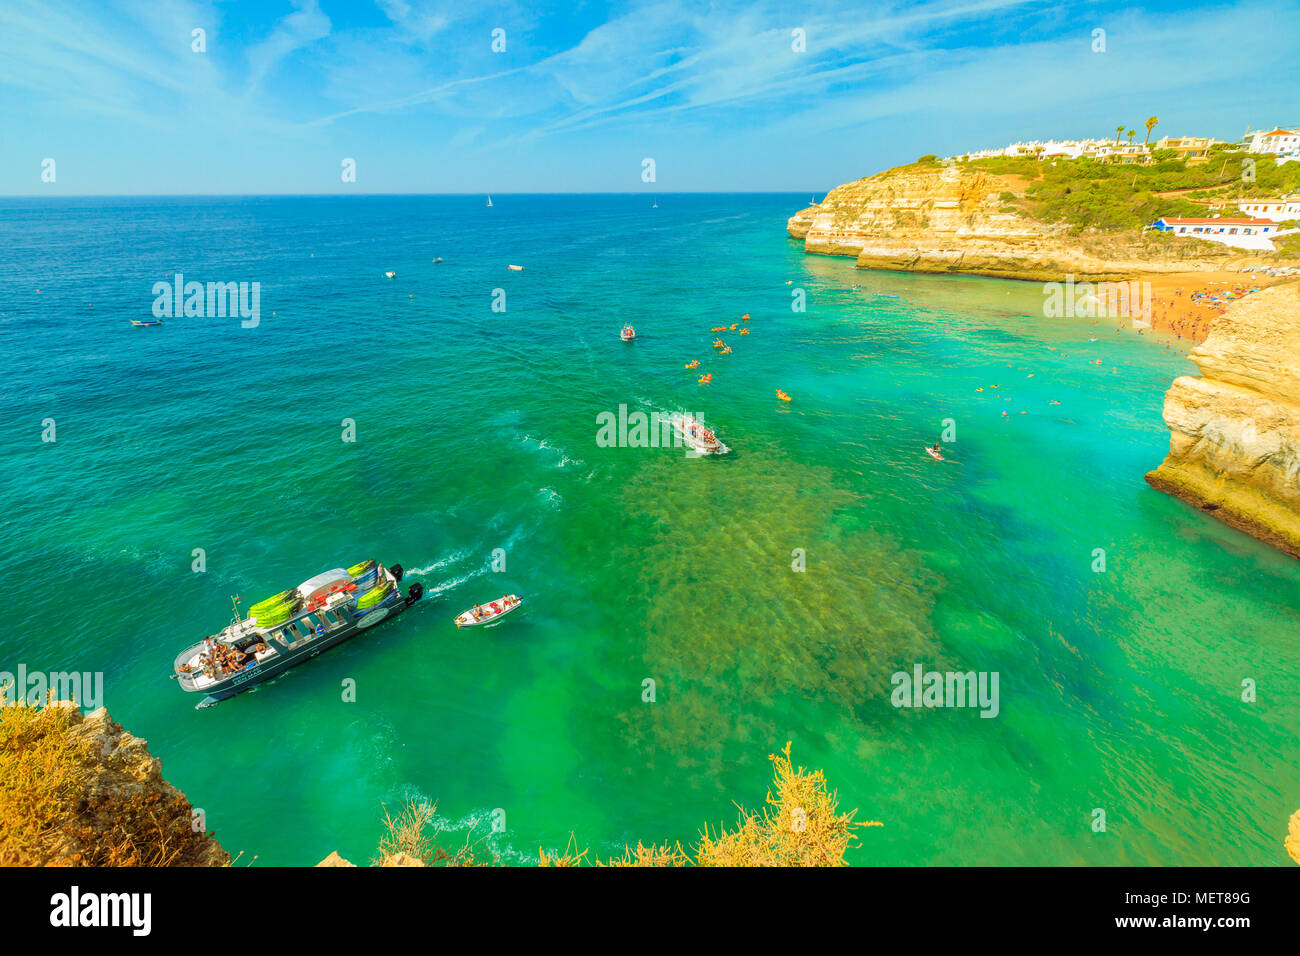 Benagil, Portugal - August 23, 2017: aerial view from promontory in Algarge Coast of boats and kayaking tour to famous sea cave Algar de Benagil. Praia de Benagil in the distance. Turquoise waters. Stock Photo